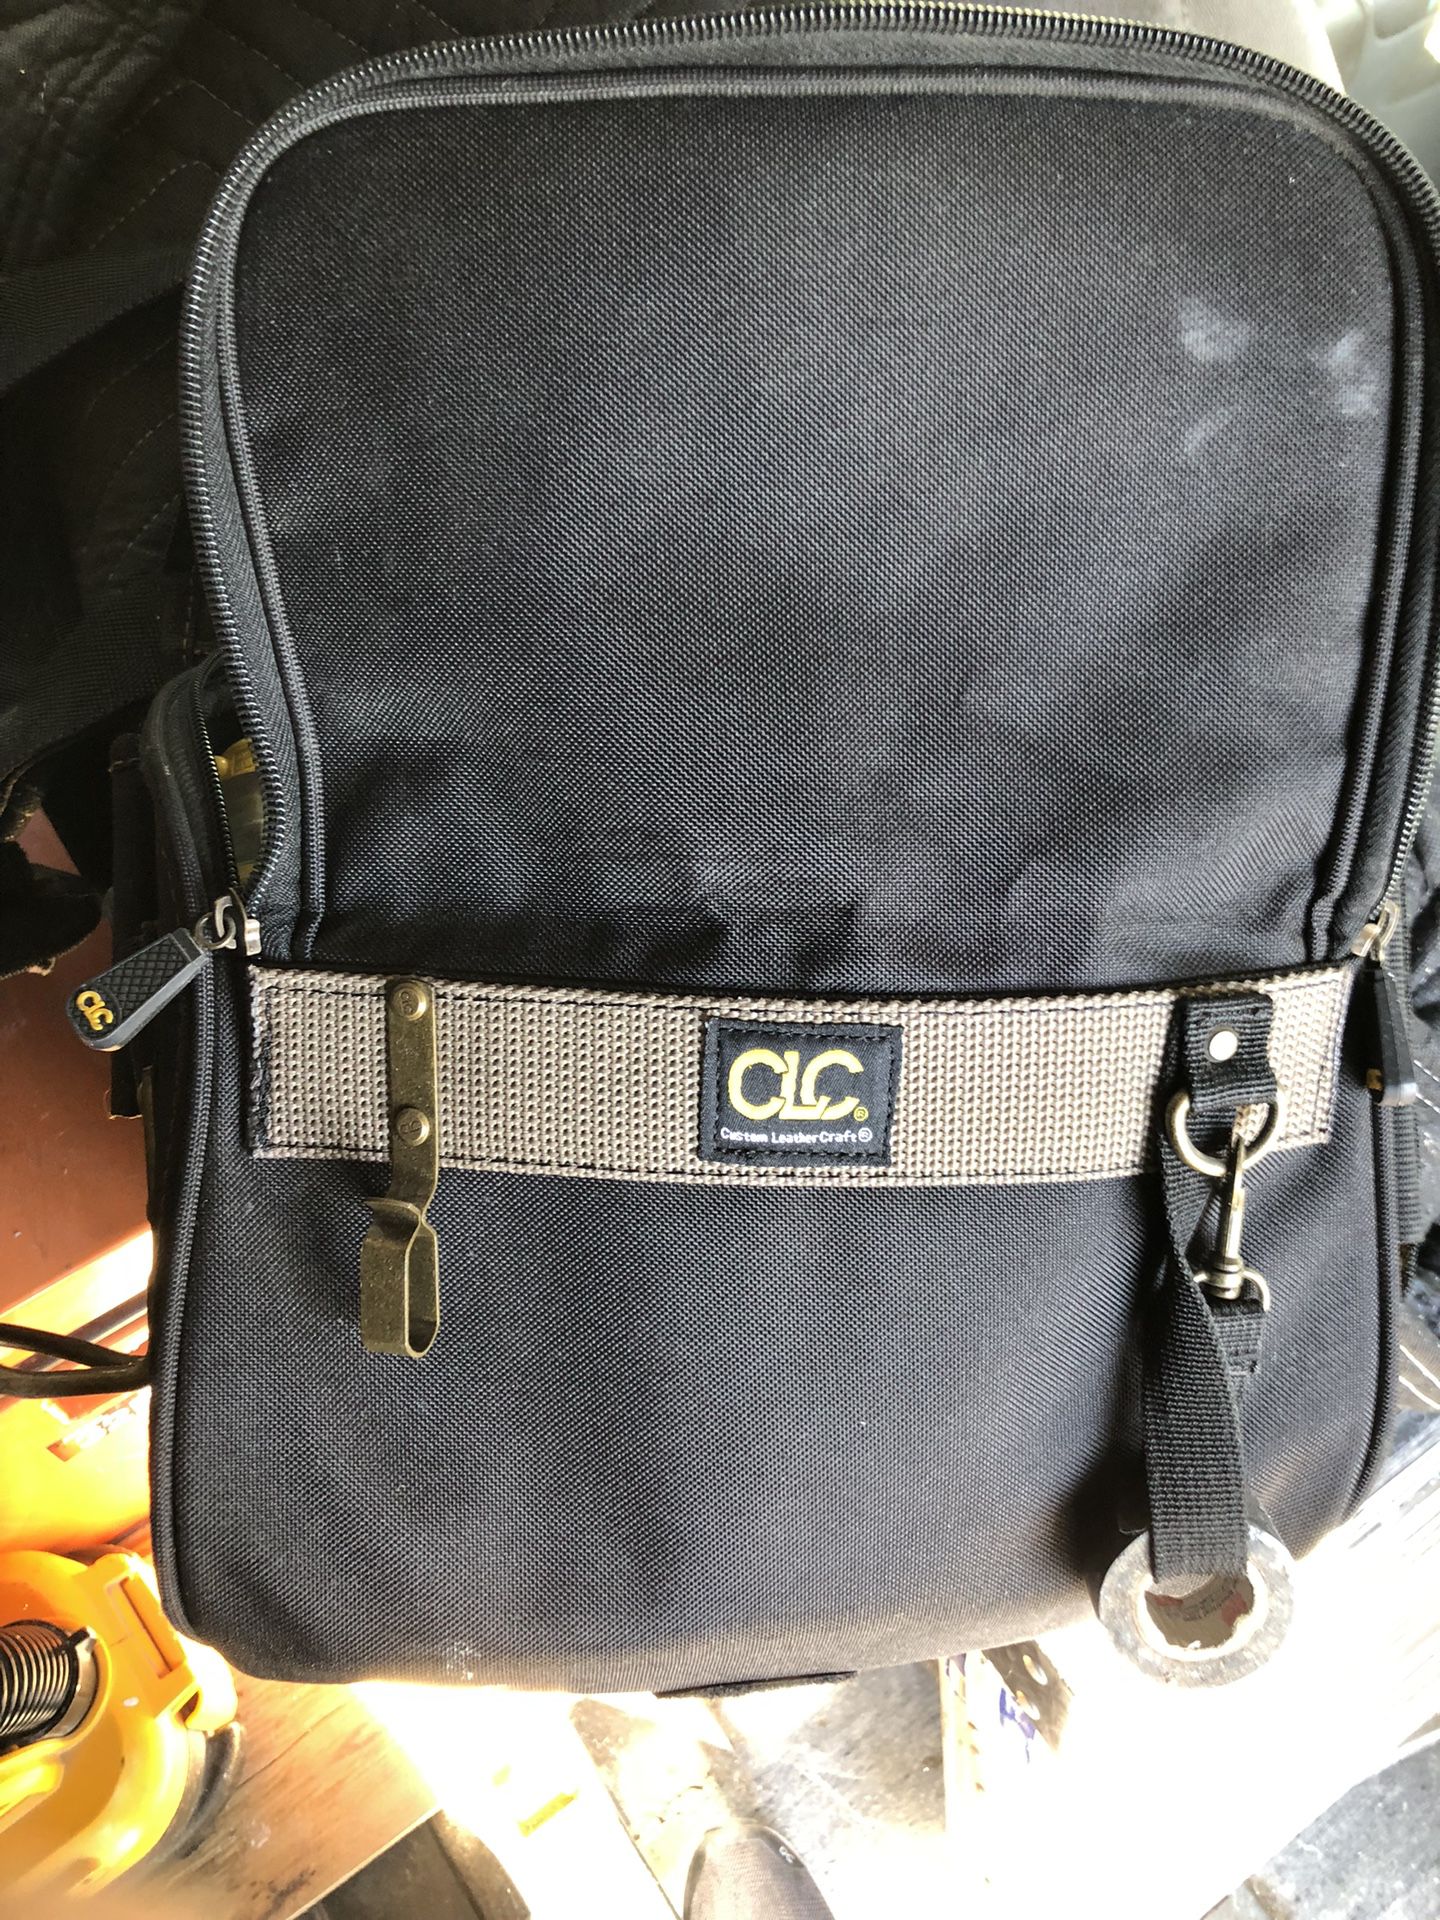 Electrician Bags 